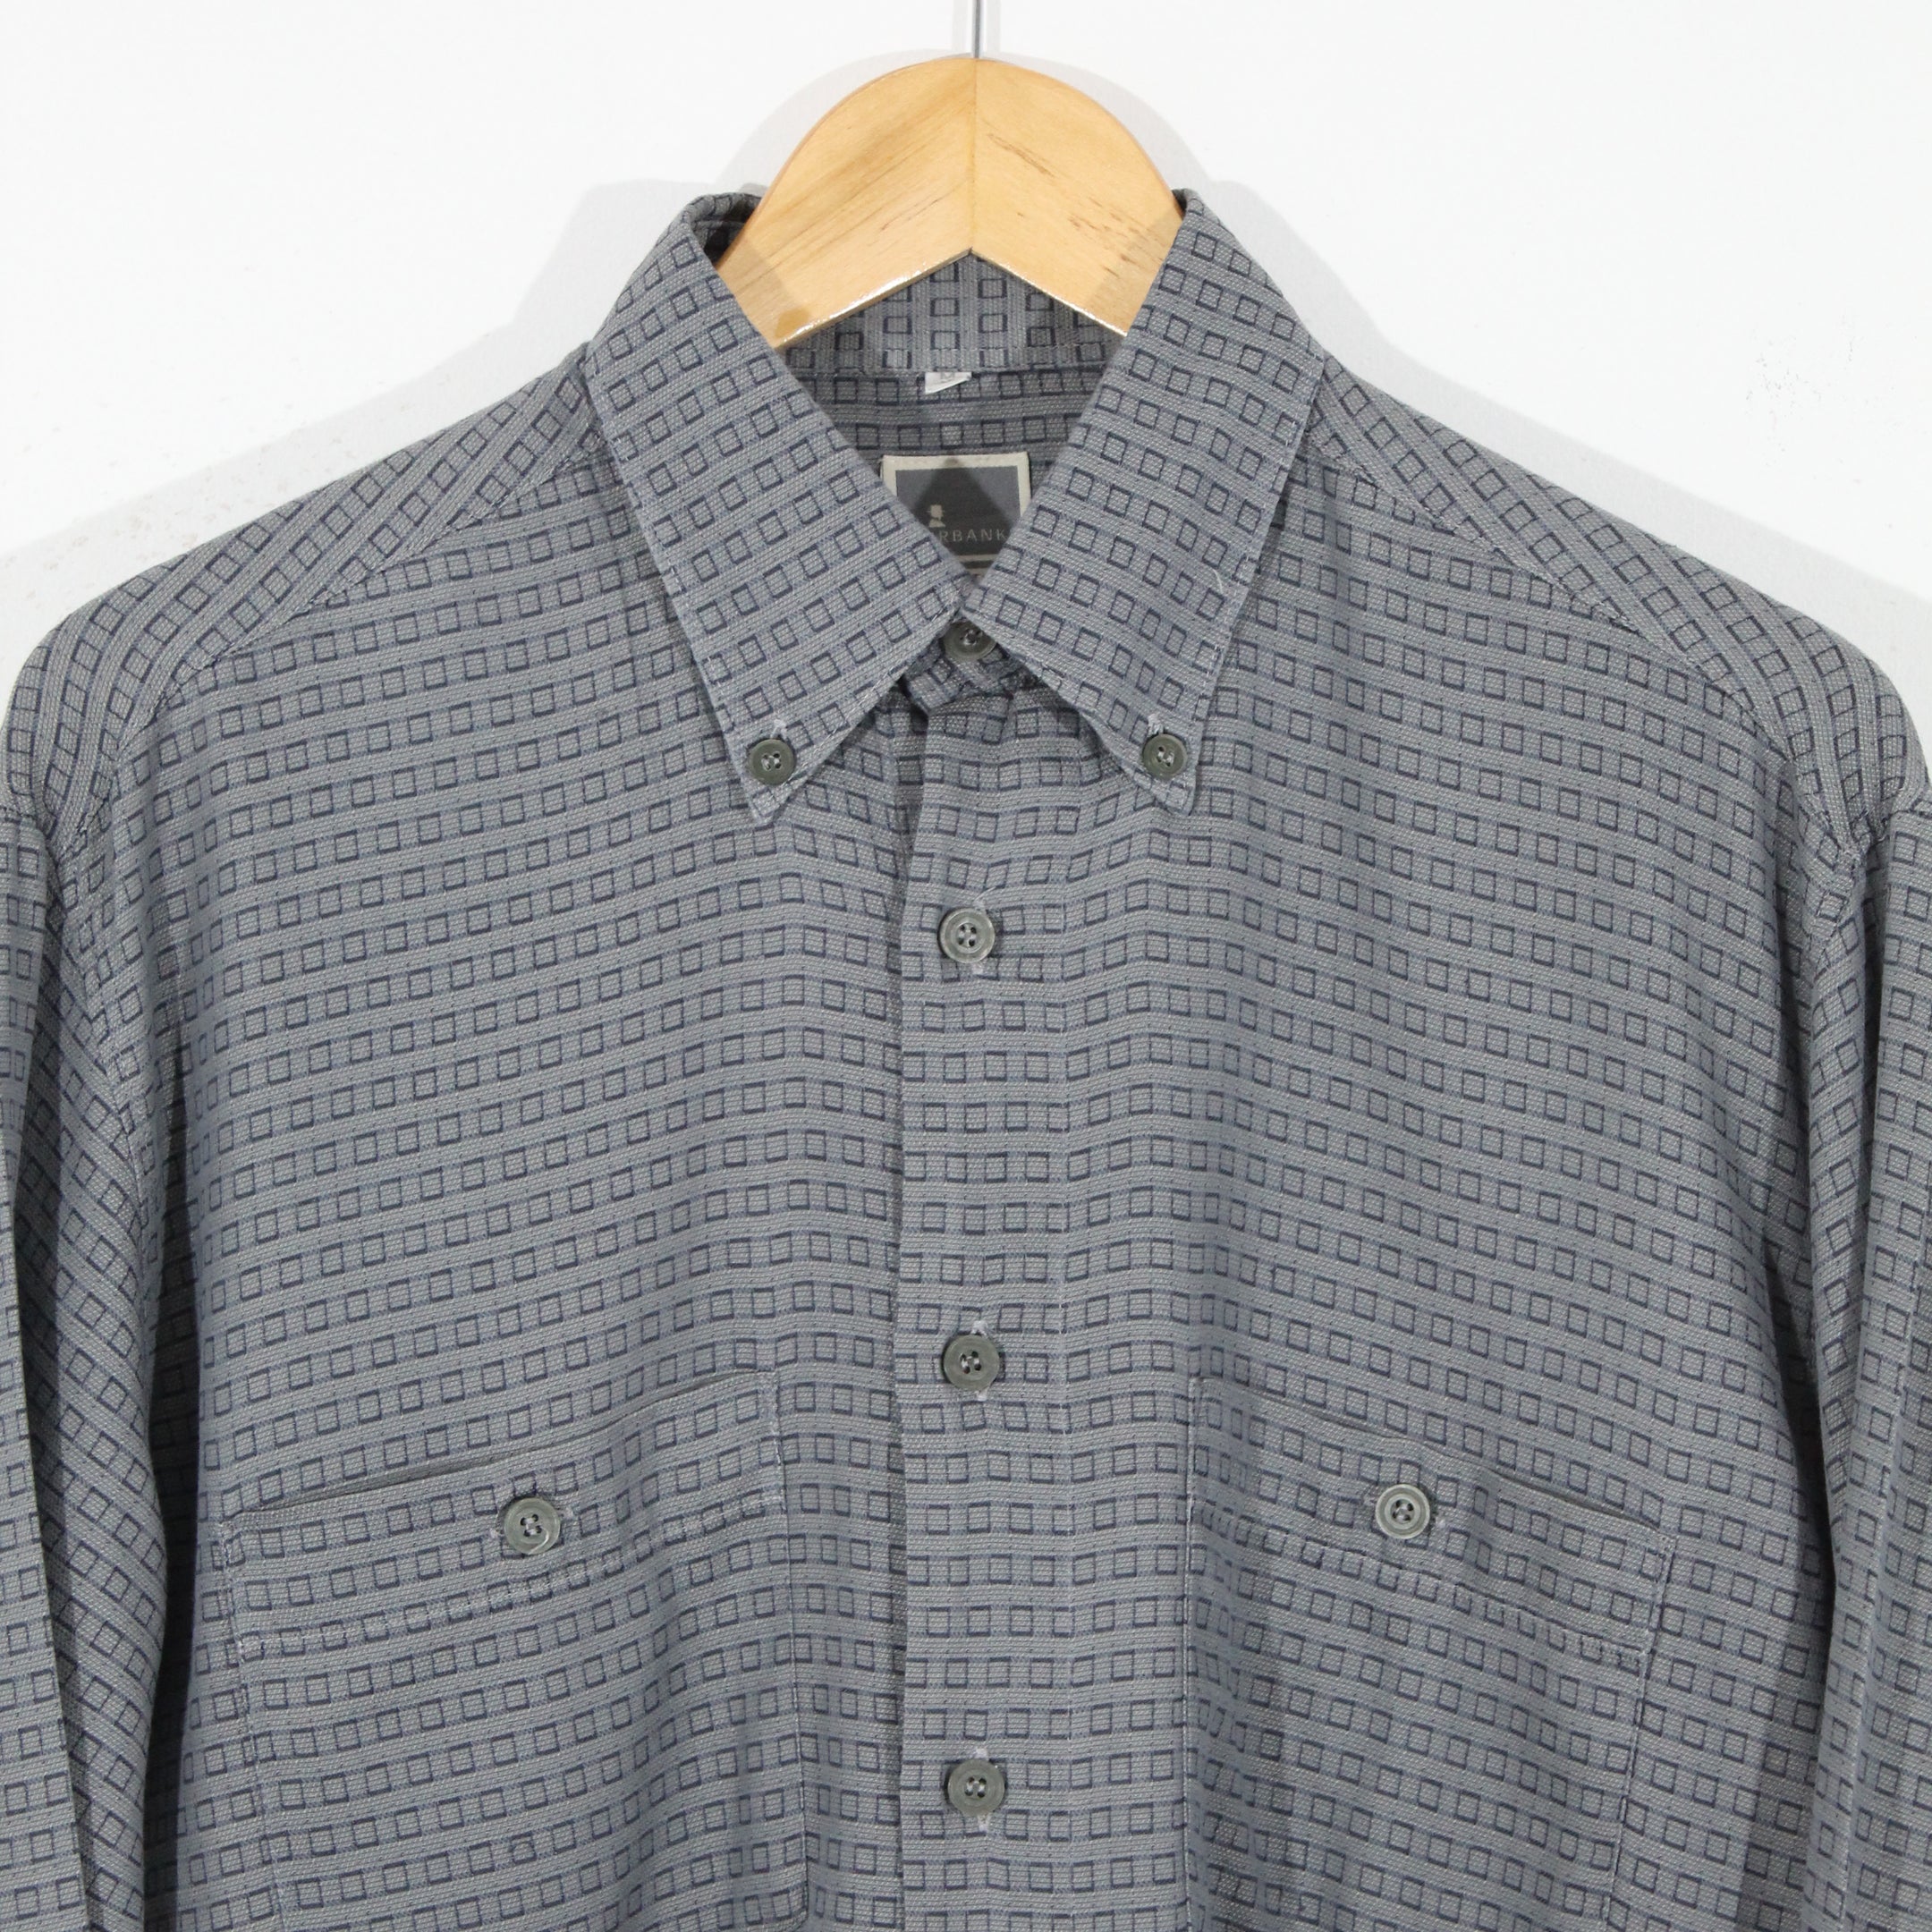 90's Grey Patterned Shirt (M)